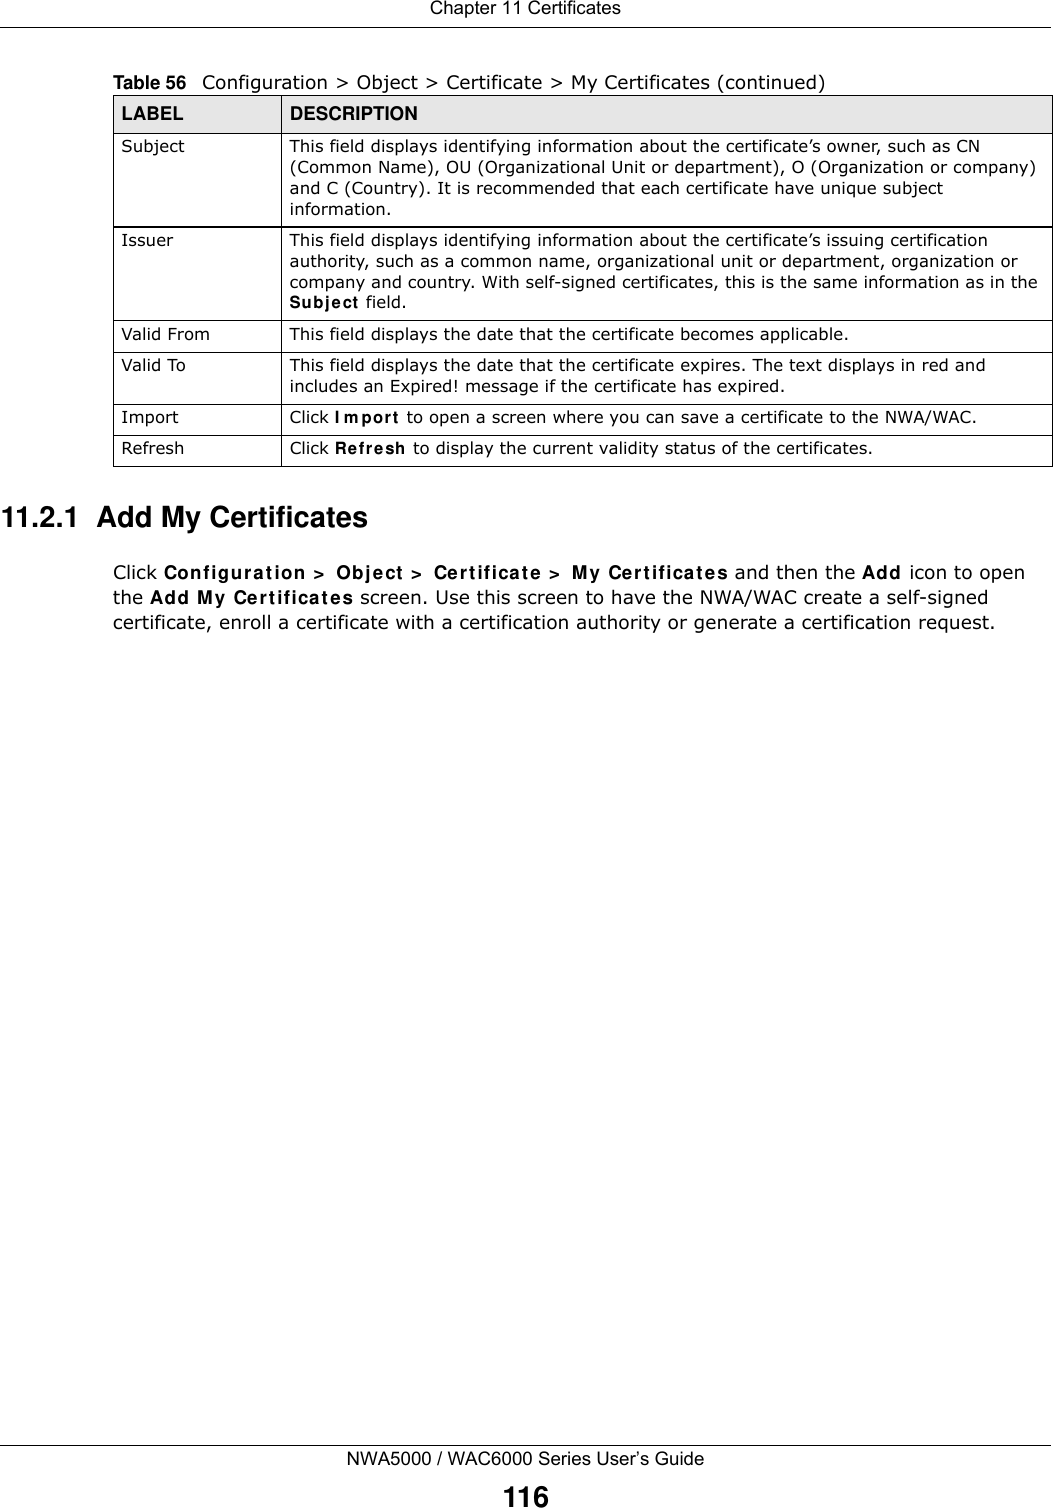 Chapter 11 CertificatesNWA5000 / WAC6000 Series User’s Guide11611.2.1  Add My CertificatesClick Configuration &gt; Object &gt; Certificate &gt; My Certificates and then the Add icon to open the Add My Certificates screen. Use this screen to have the NWA/WAC create a self-signed certificate, enroll a certificate with a certification authority or generate a certification request.Subject This field displays identifying information about the certificate’s owner, such as CN (Common Name), OU (Organizational Unit or department), O (Organization or company) and C (Country). It is recommended that each certificate have unique subject information. Issuer This field displays identifying information about the certificate’s issuing certification authority, such as a common name, organizational unit or department, organization or company and country. With self-signed certificates, this is the same information as in the Subject field.Valid From This field displays the date that the certificate becomes applicable. Valid To This field displays the date that the certificate expires. The text displays in red and includes an Expired! message if the certificate has expired.Import Click Import to open a screen where you can save a certificate to the NWA/WAC.Refresh Click Refresh to display the current validity status of the certificates.Table 56   Configuration &gt; Object &gt; Certificate &gt; My Certificates (continued)LABEL DESCRIPTION